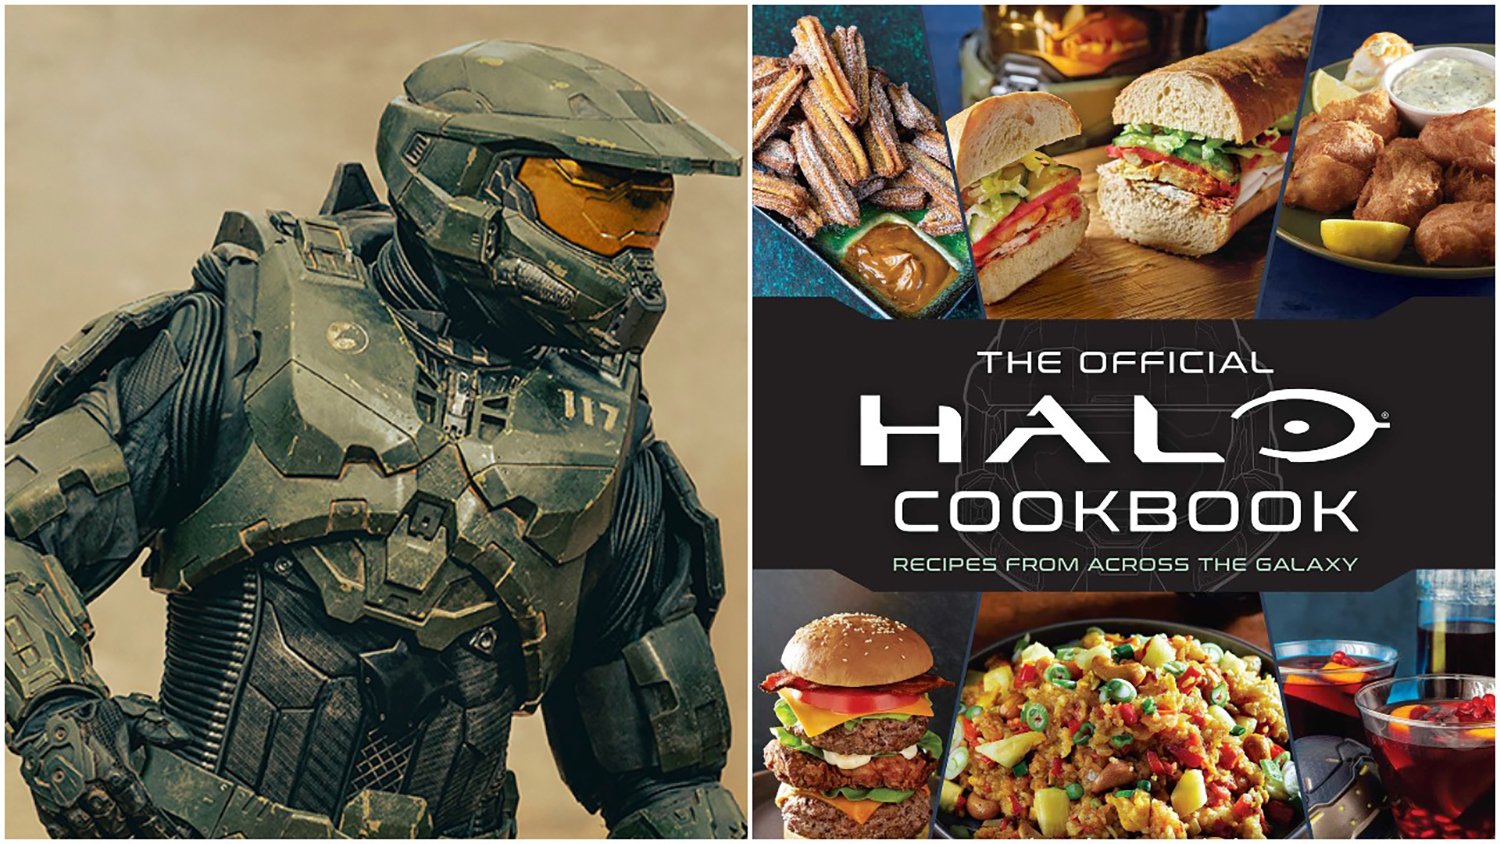 Halo' TV Series Moves From Showtime To Paramount+ – Deadline